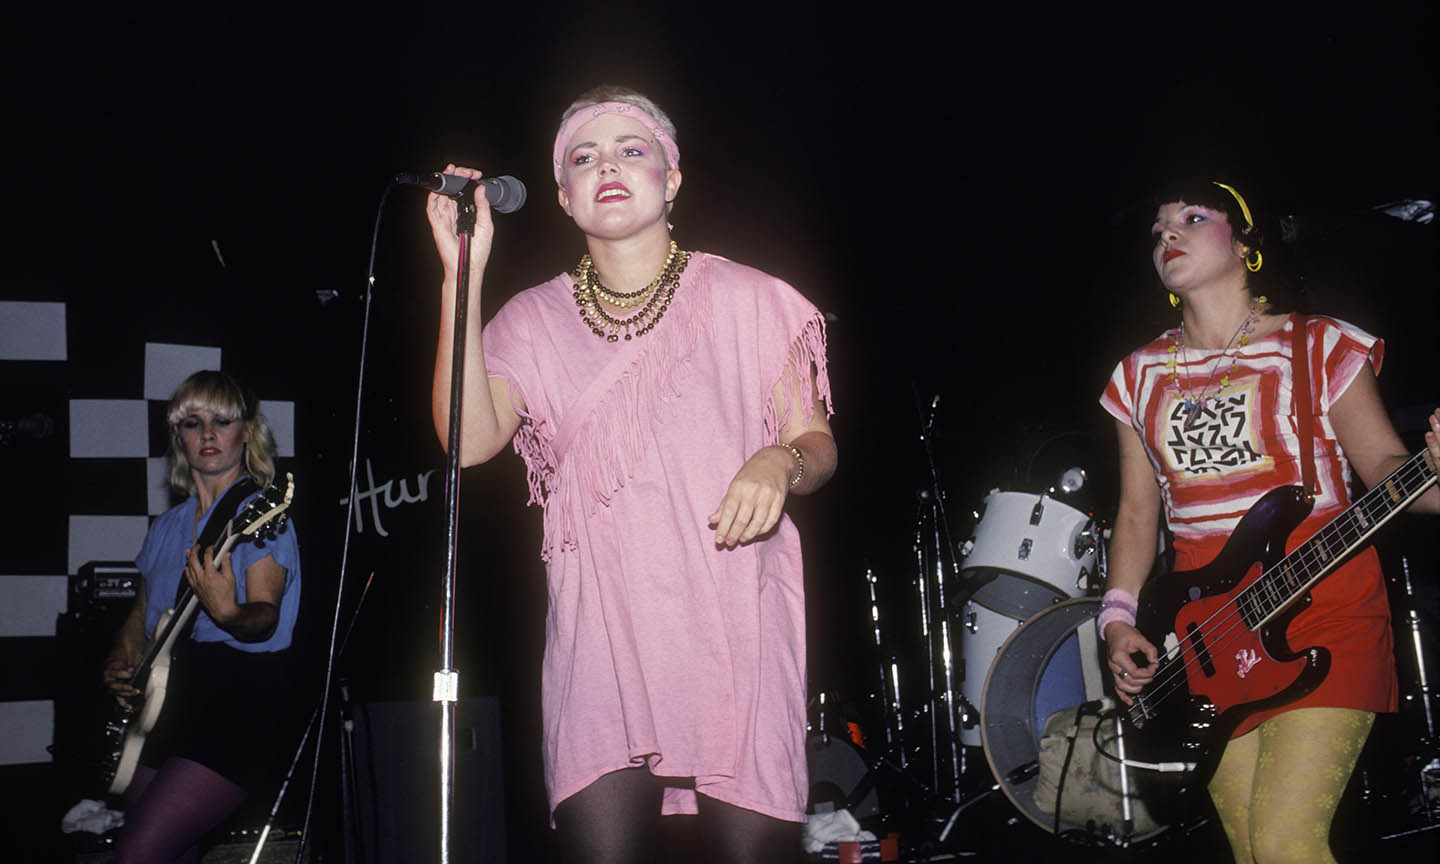 The Go-Go's Release First New Song in 19 Years, Watch the Trailer